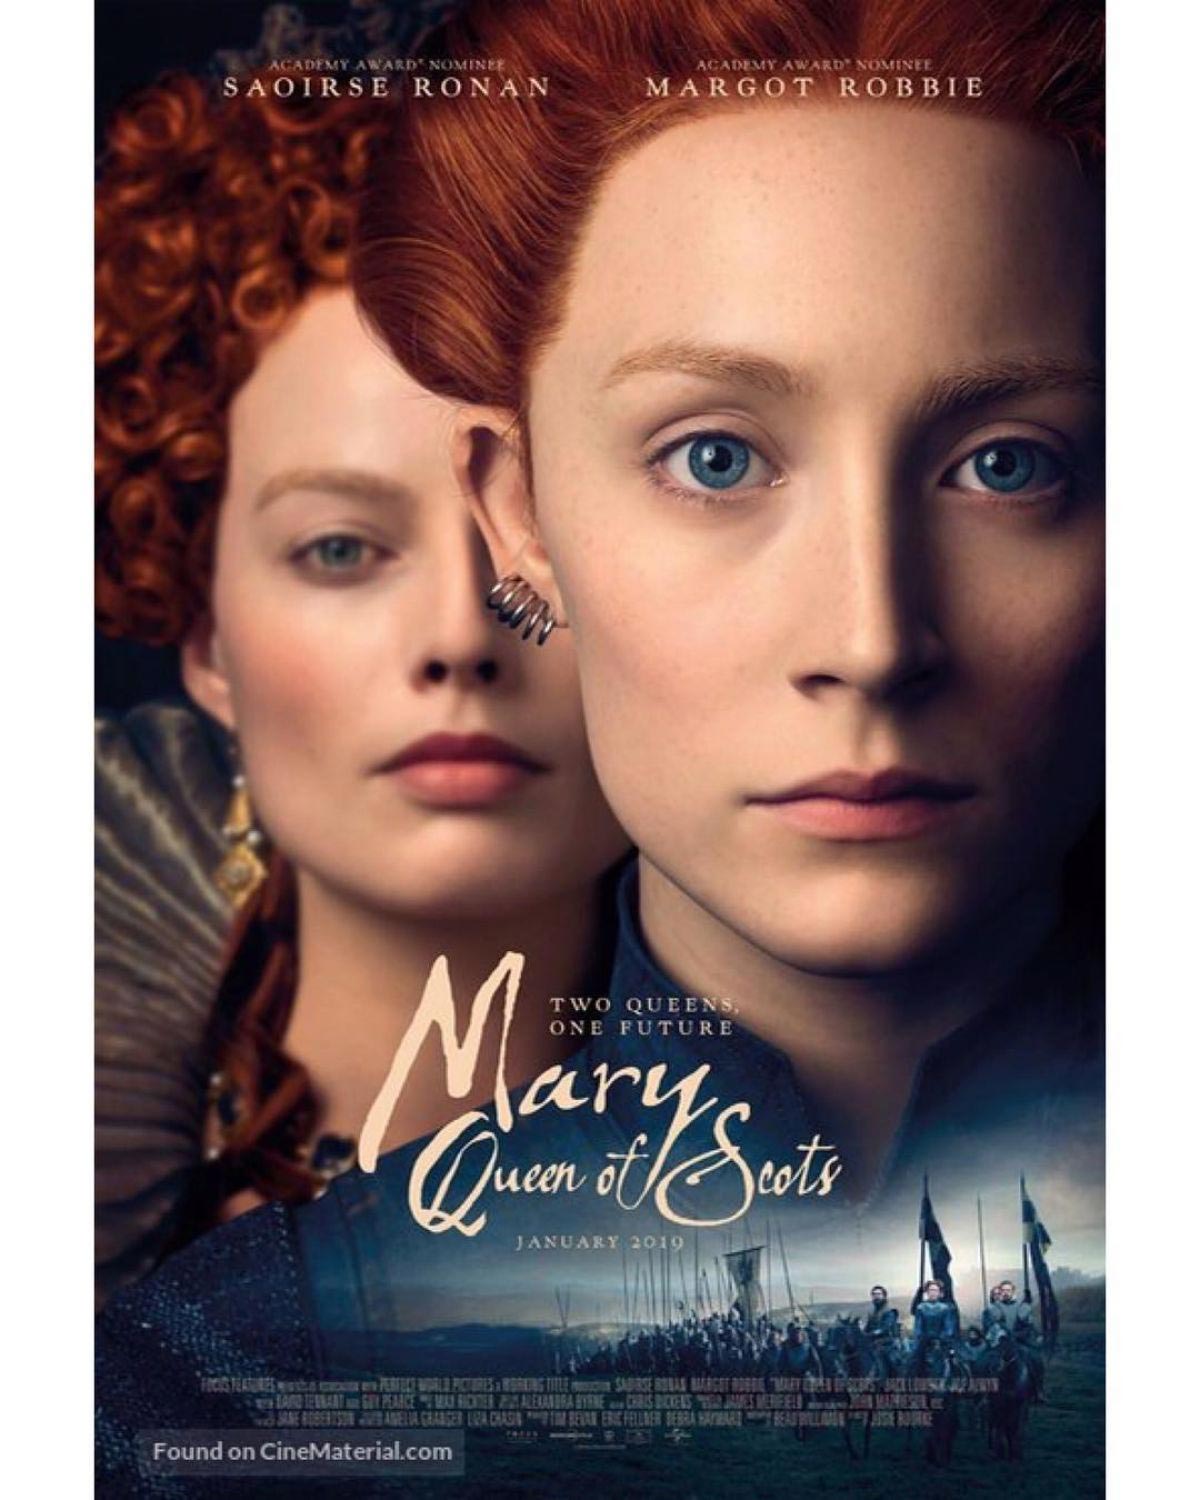 Margot Robbie at Mary Queen of Scots Posters and Promos 2018/12/02